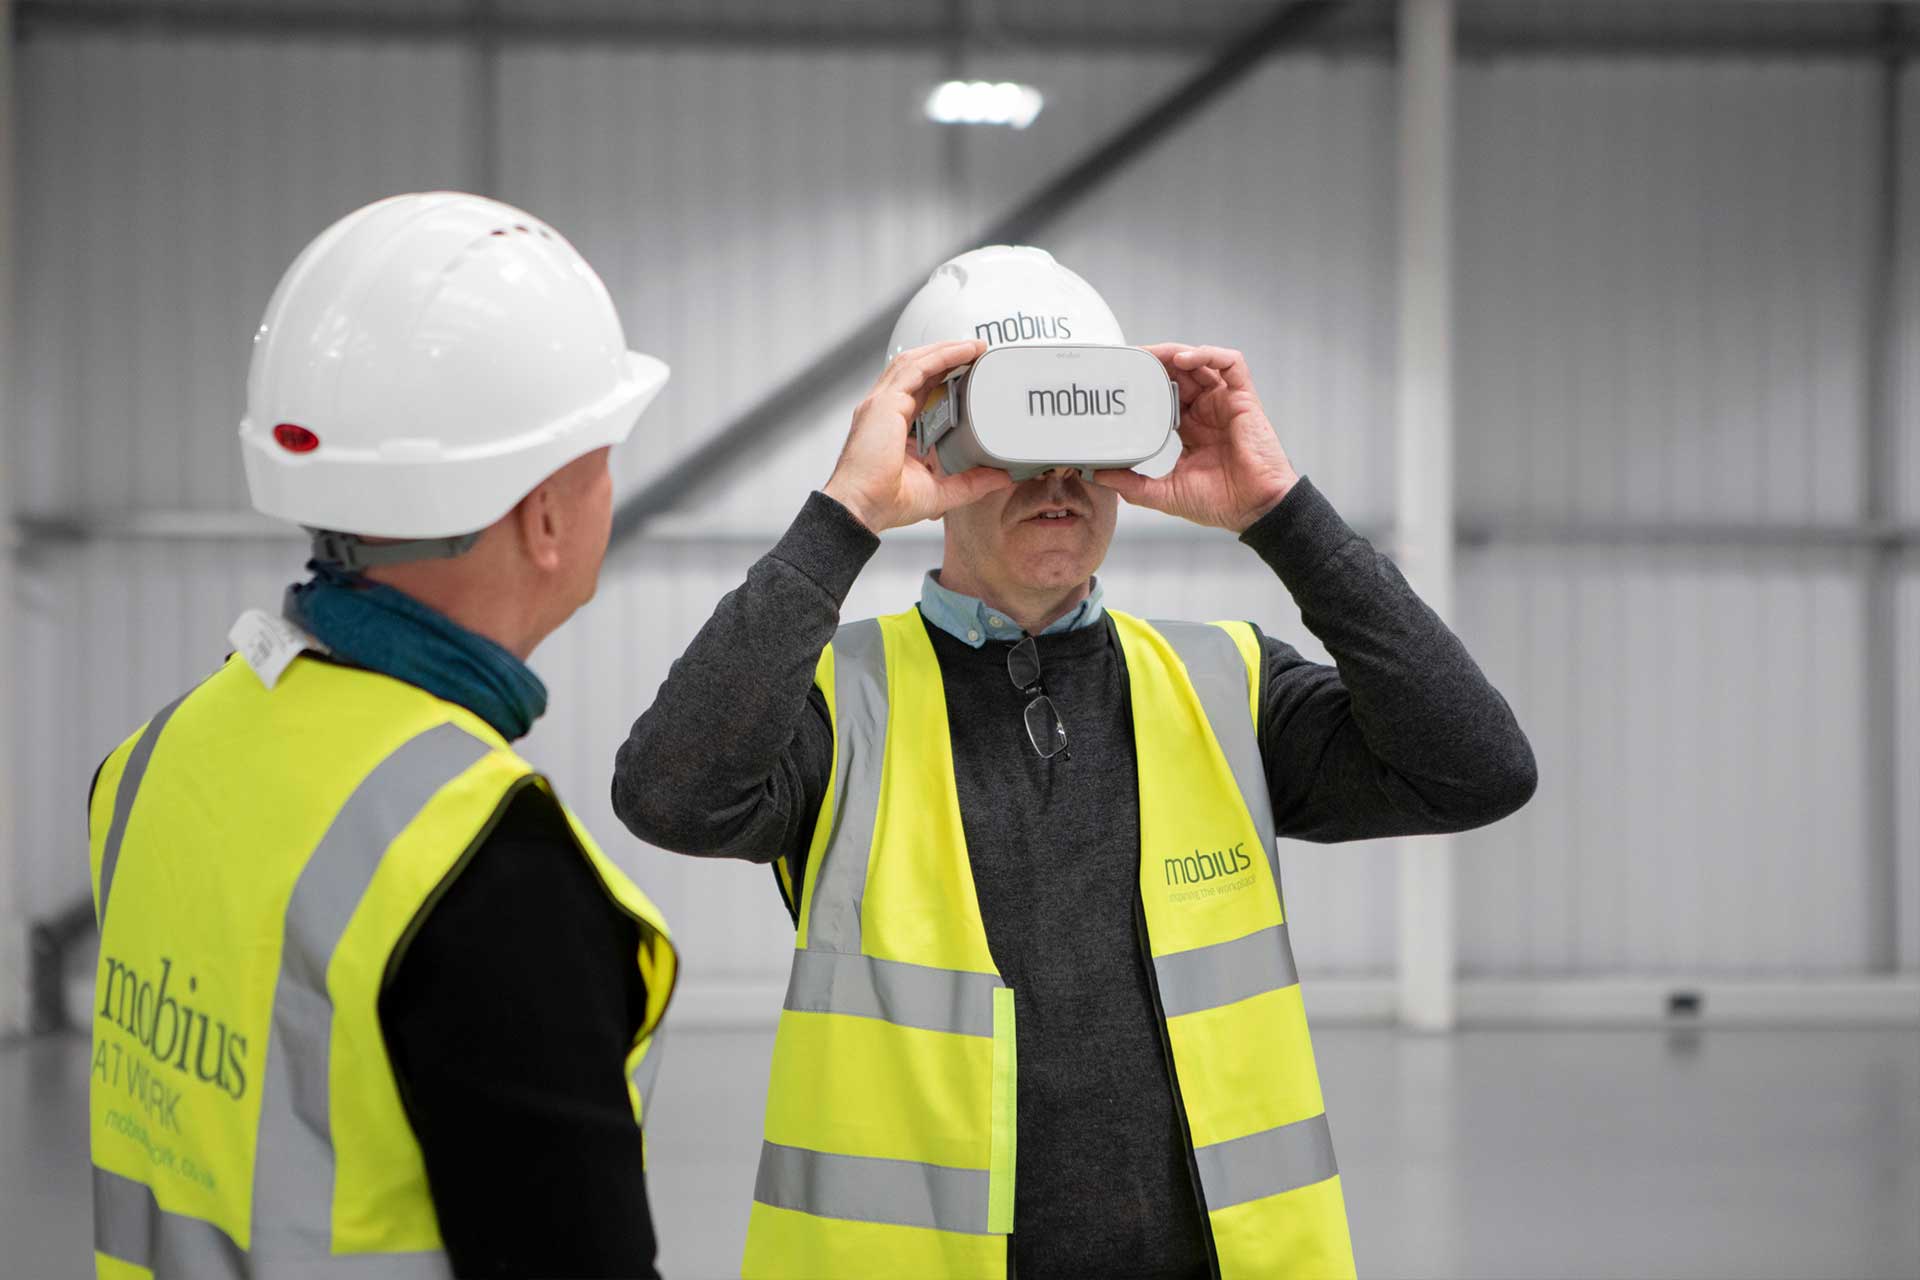 Contractor using a VR headset